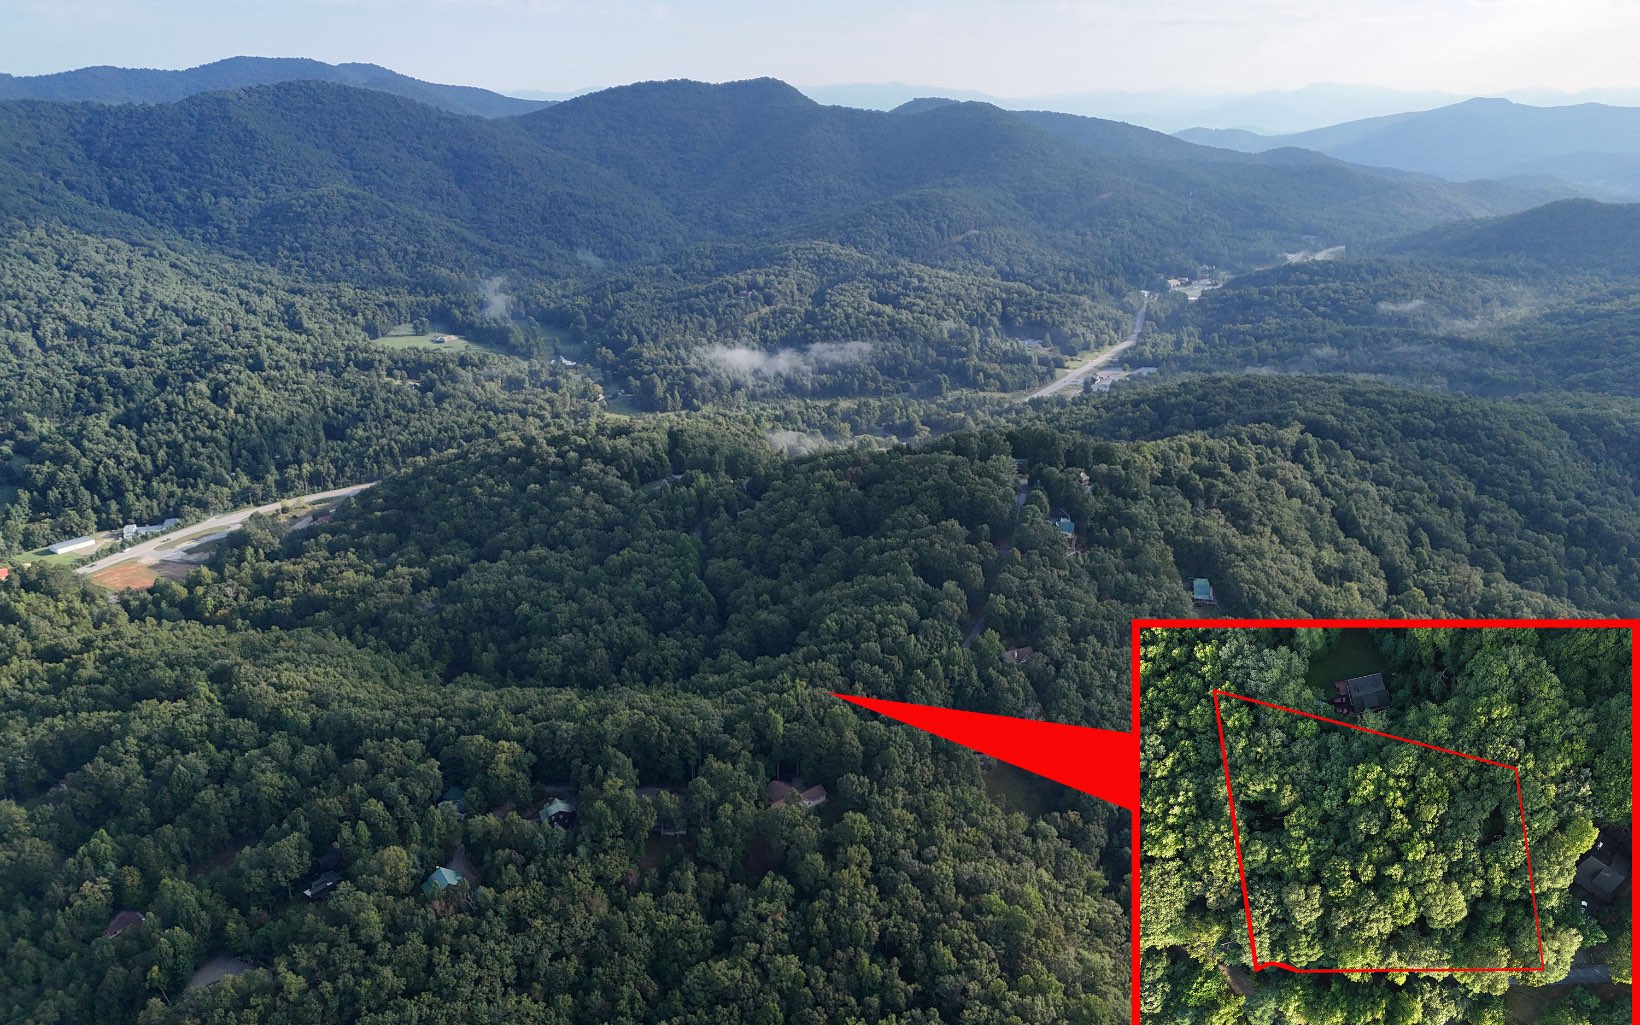 Be three miles from Blairsville and enjoy some wonderful views of National Forest from your dream home. This 1.49 acre lot is located in Ross Ridge Subdivision of Blairsville. Ross Ridge is a nice and established subdivision with minimal restrictions to protect your investment. The subdivision is well known in the area because of the proximity to town and the wonderful views. Young Harris, Hiawassee, Lake Chatuge, and Lake Nottely are just a few minutes down the road. The perfec location for your next home.